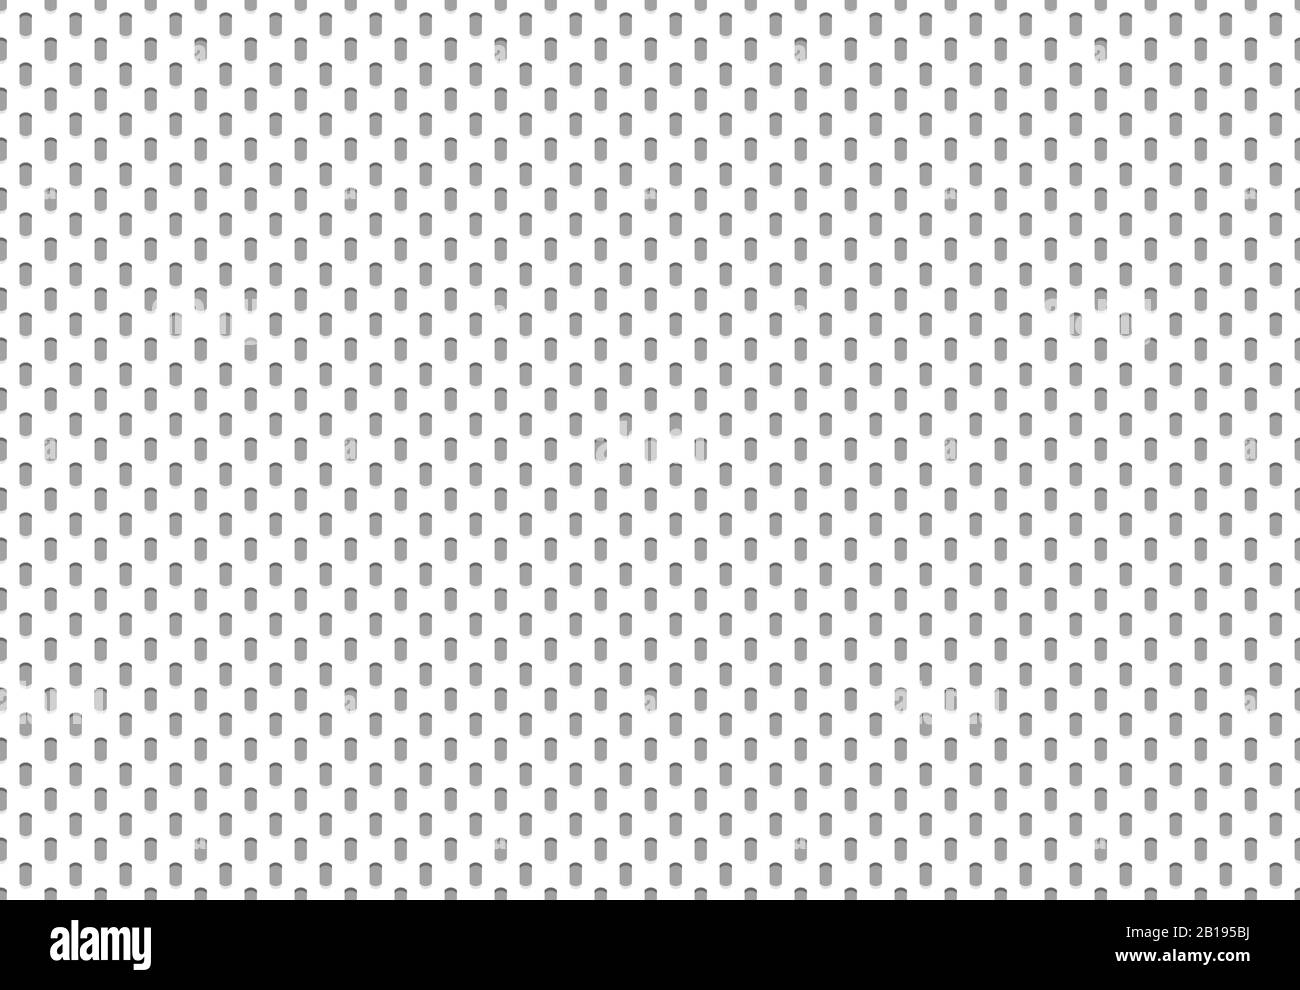 Woven pattern Black and White Stock Photos & Images - Alamy